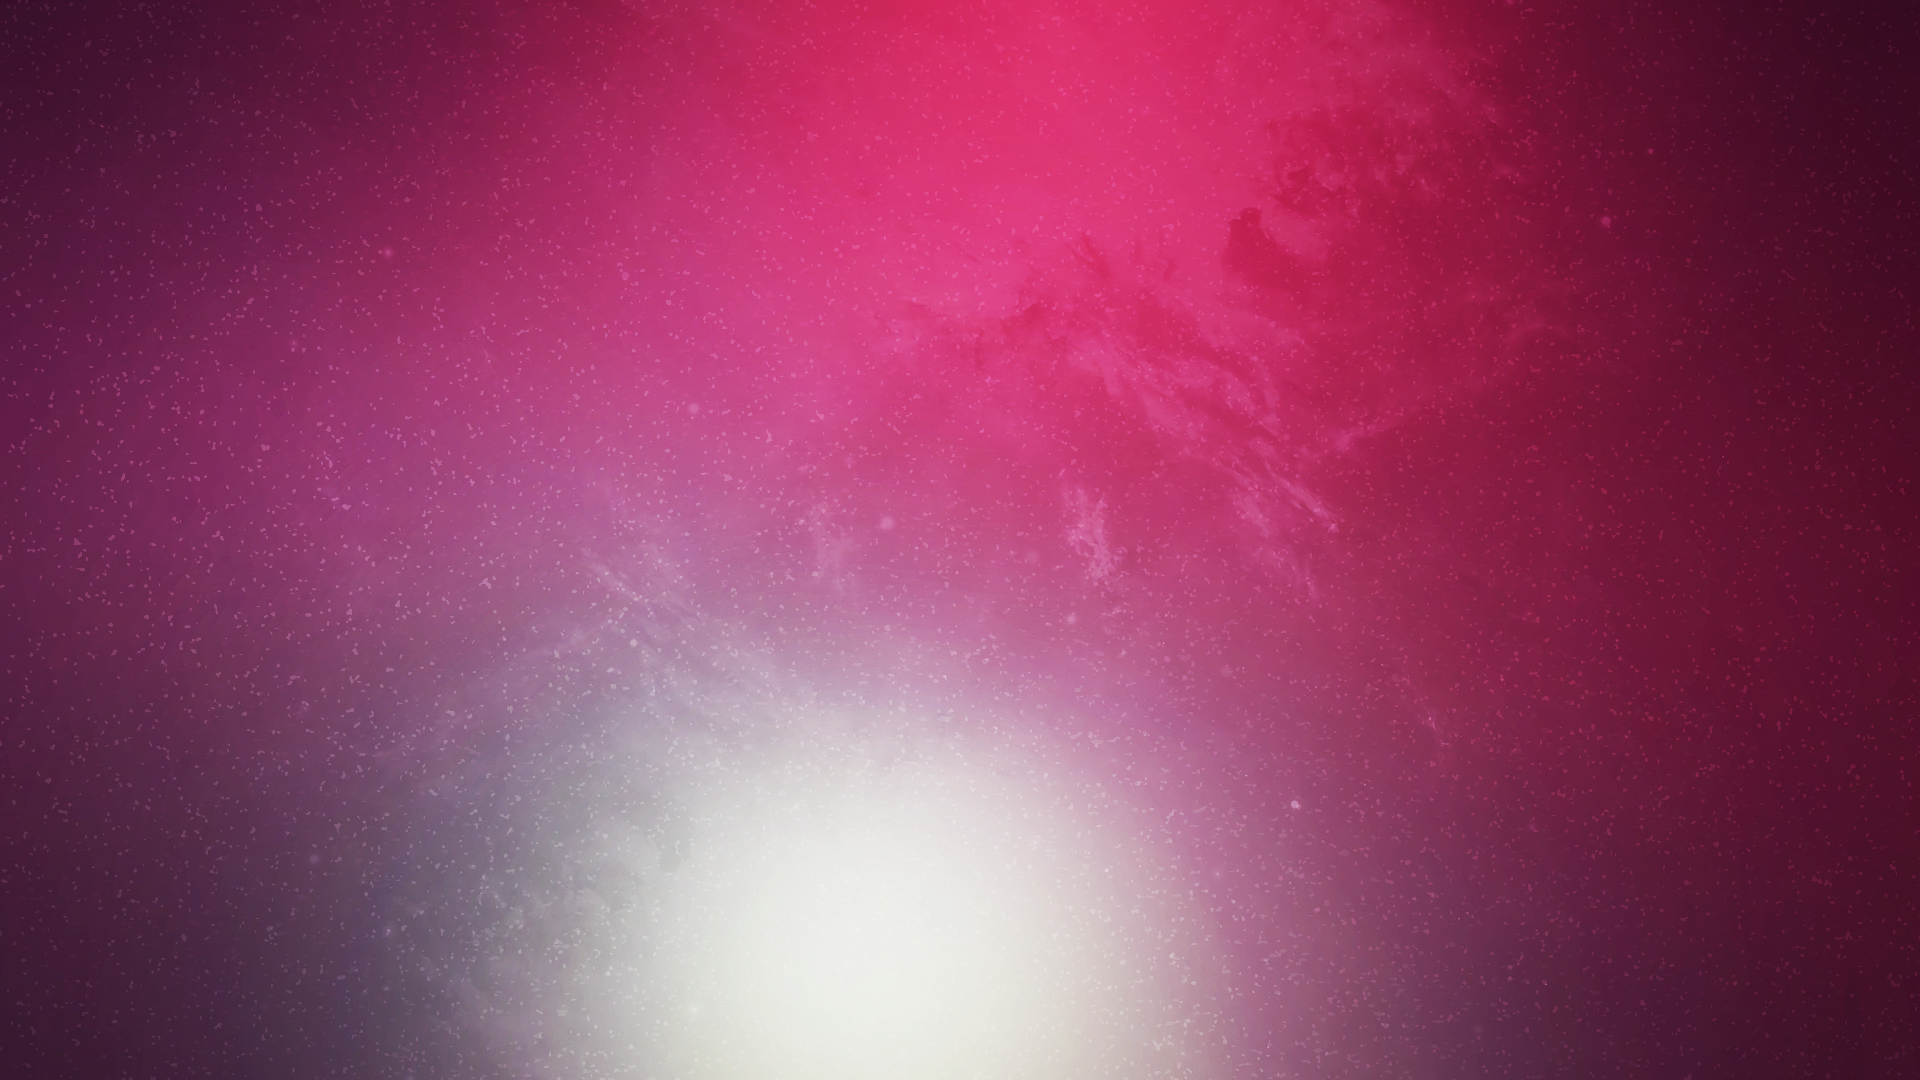 Space Haze Purple Abstract Pink Red Stars 1920x1080